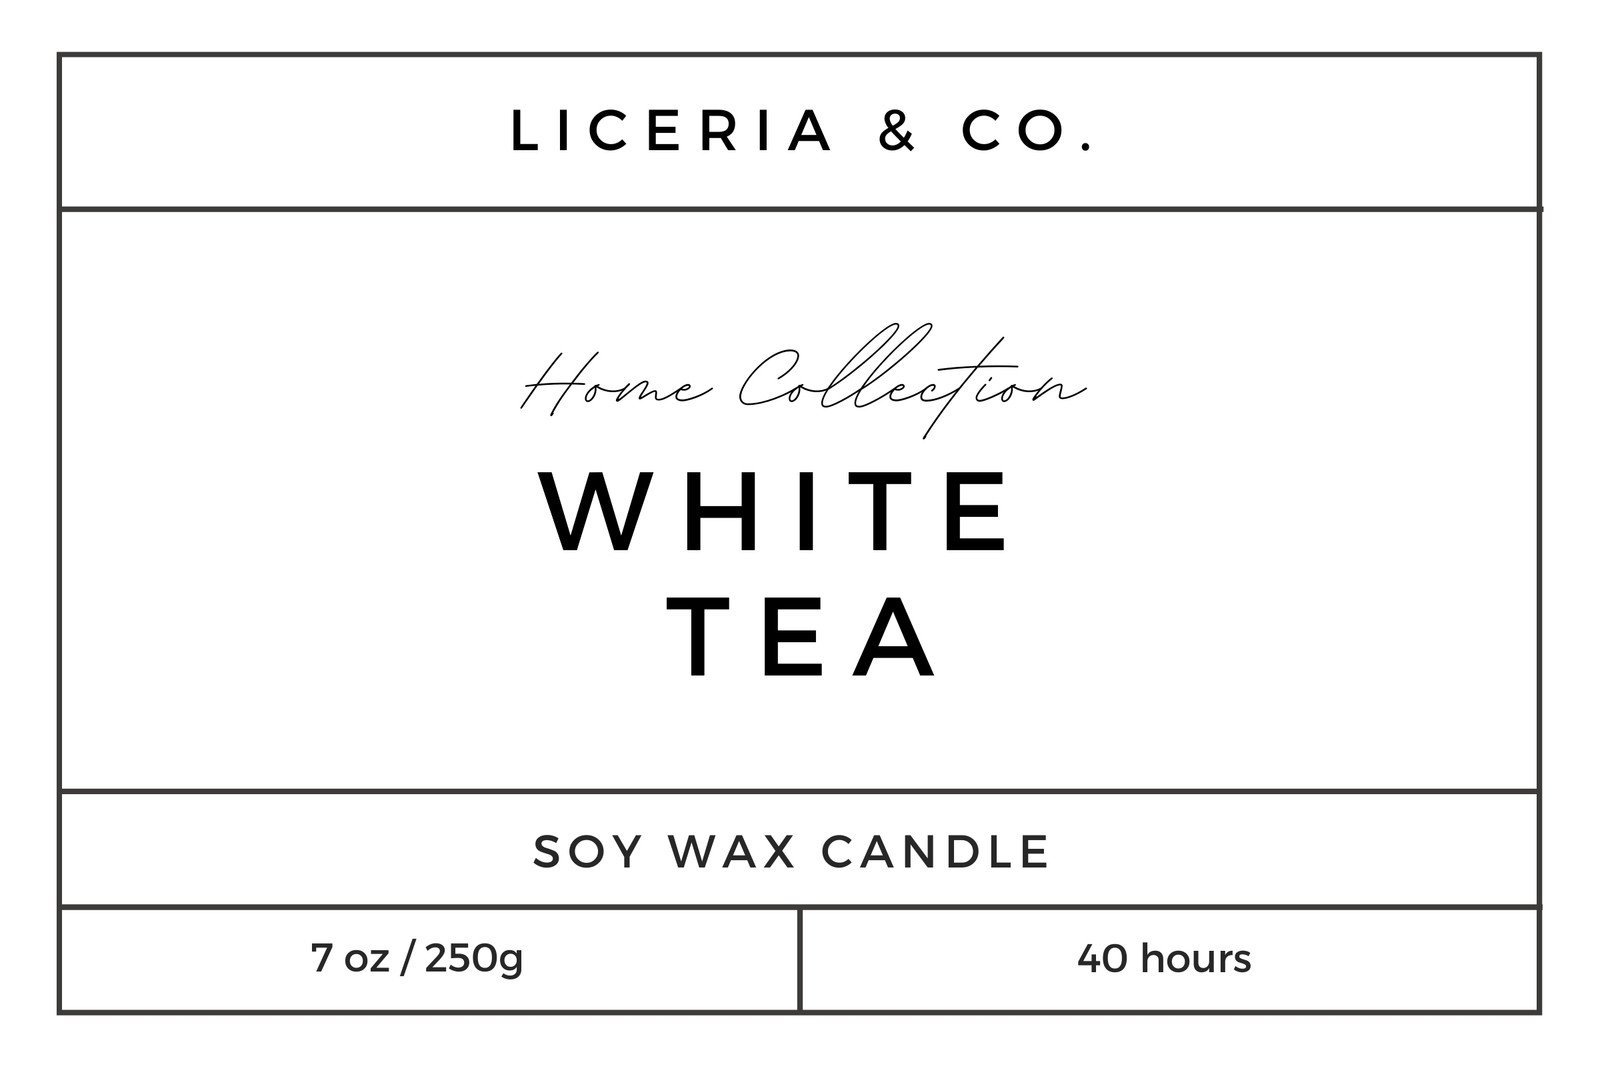 DIY Modern Candle Label Template, Minimal Candle Label, Customizable Wax  Melt Label, Candle Tin Label Template, Instant Download Rain 